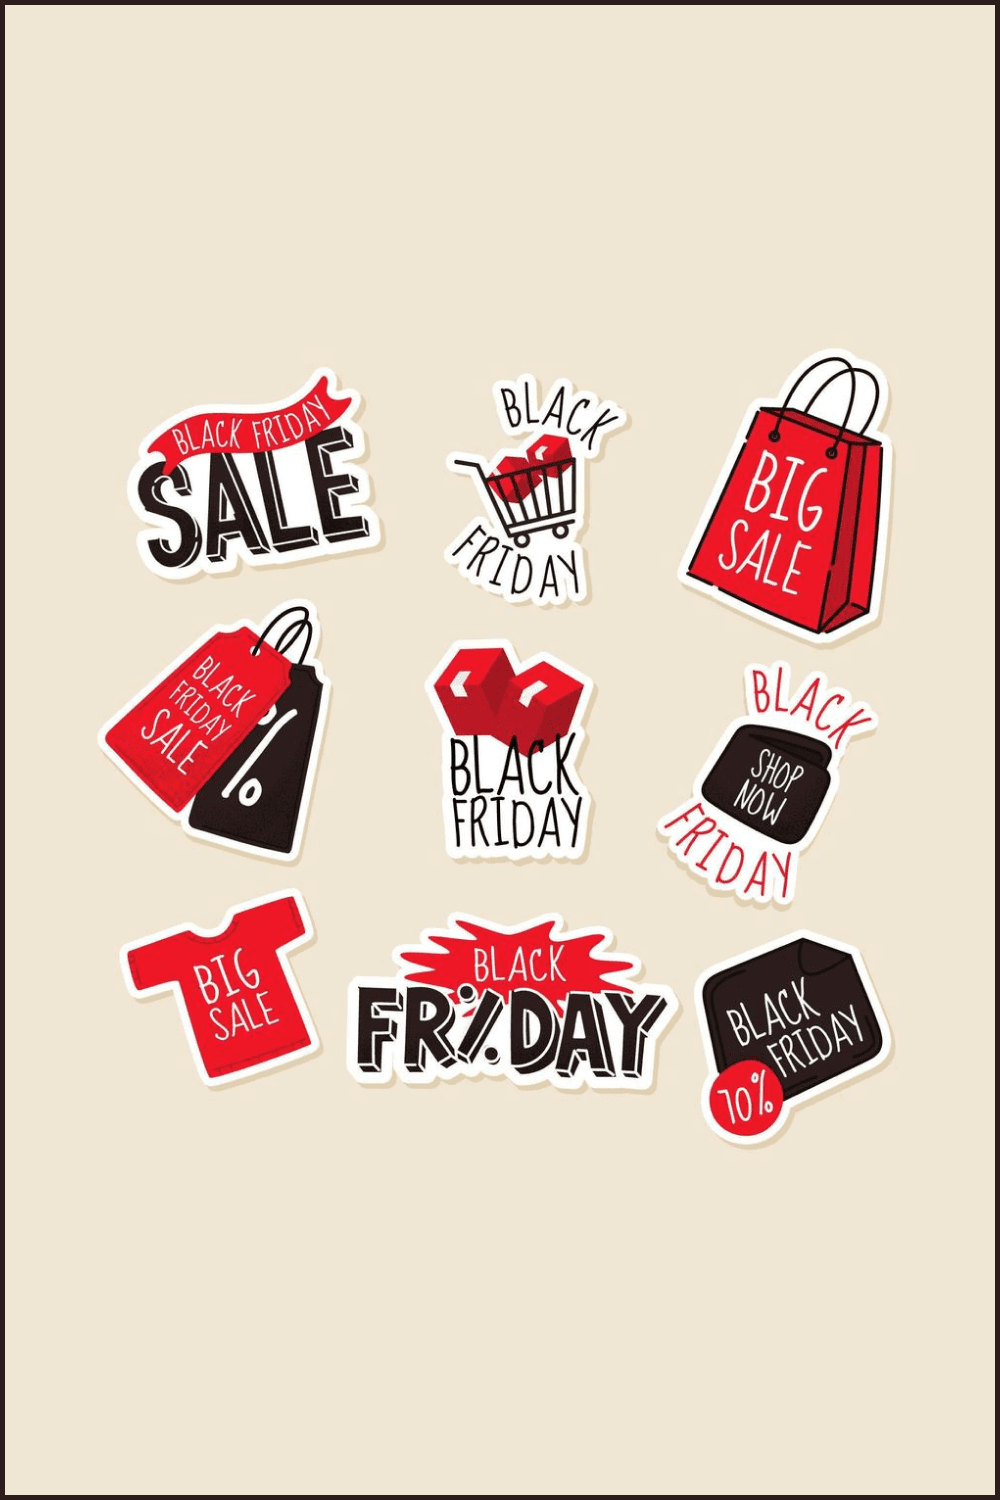 Collage of stickers for Black Friday with bag, t-shirt, price tags.